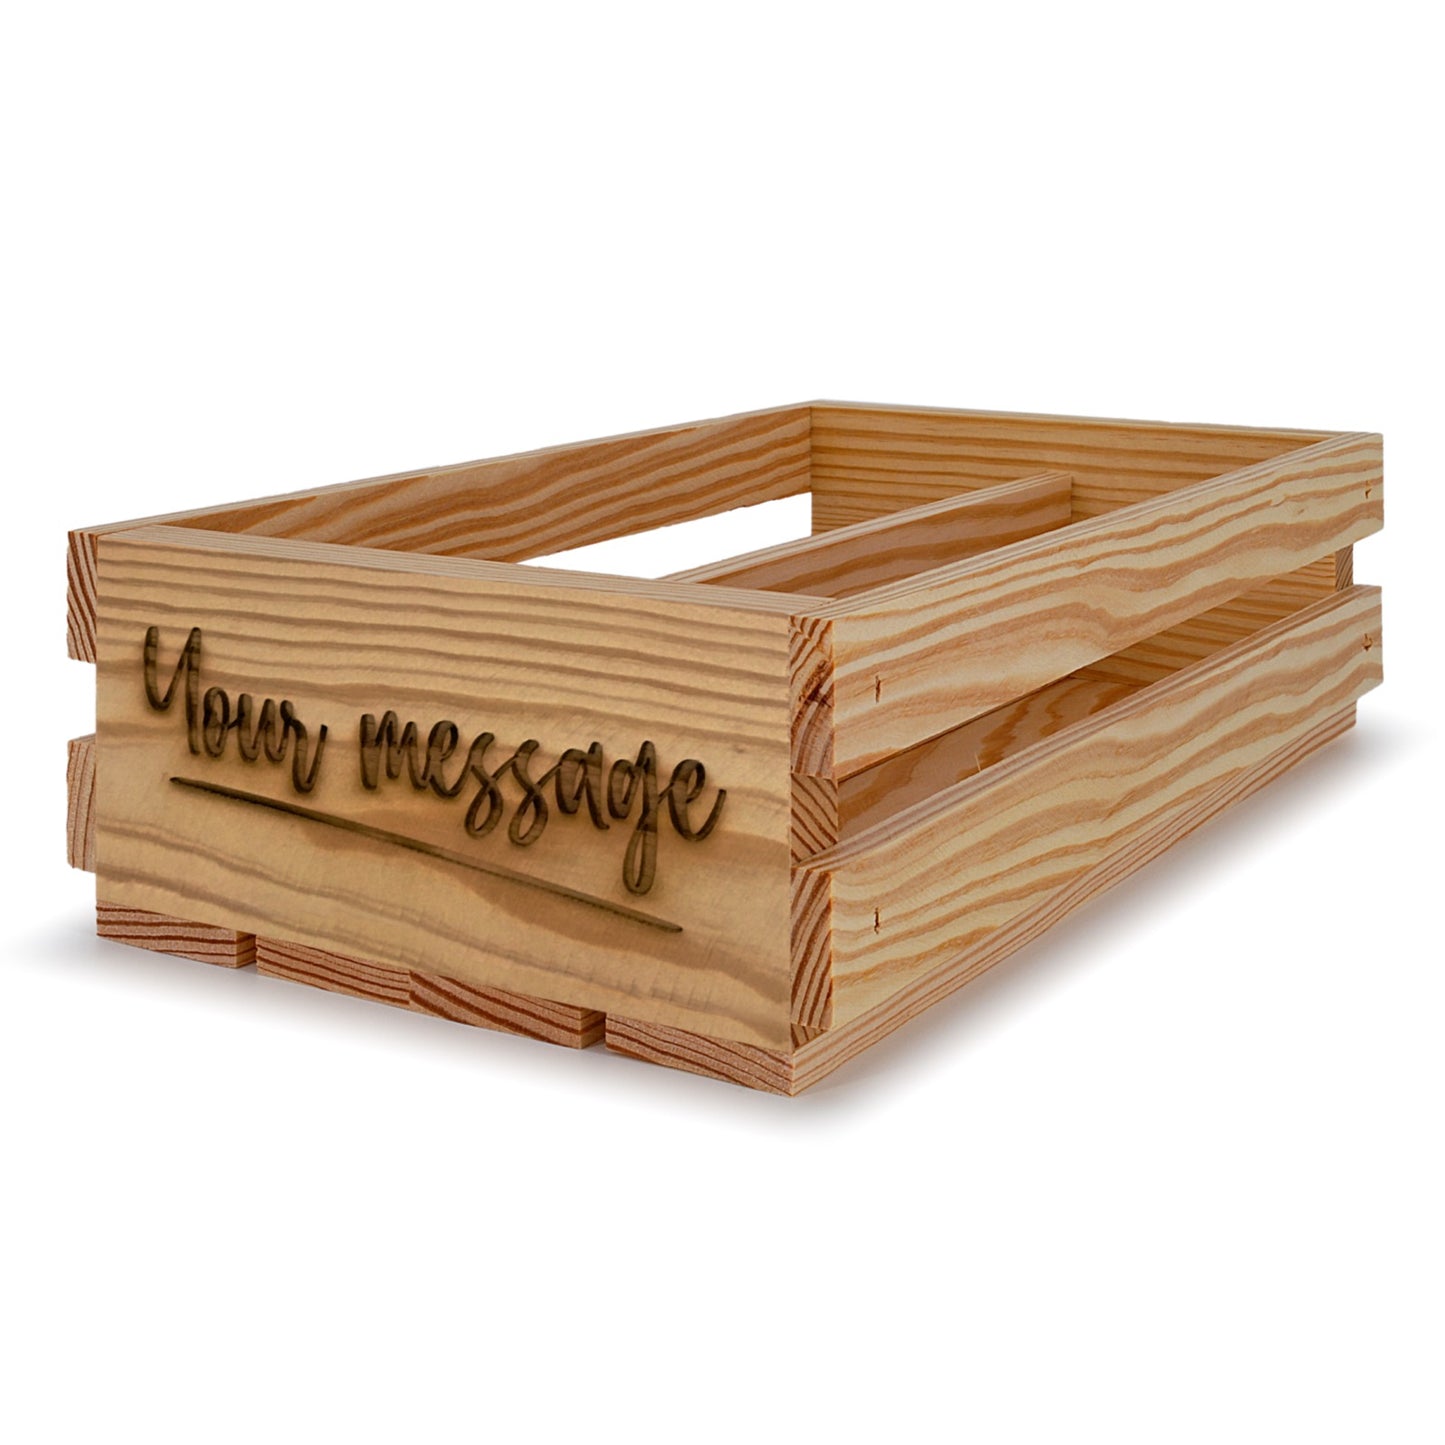 2 bottle wine crates 13x7.5x3.5 your message included, 6-WS-13-7.5-3.5-ST-NW-NL, 12-WS-13-7.5-3.5-ST-NW-NL, 24-WS-13-7.5-3.5-ST-NW-NL, 48-WS-13-7.5-3.5-ST-NW-NL,